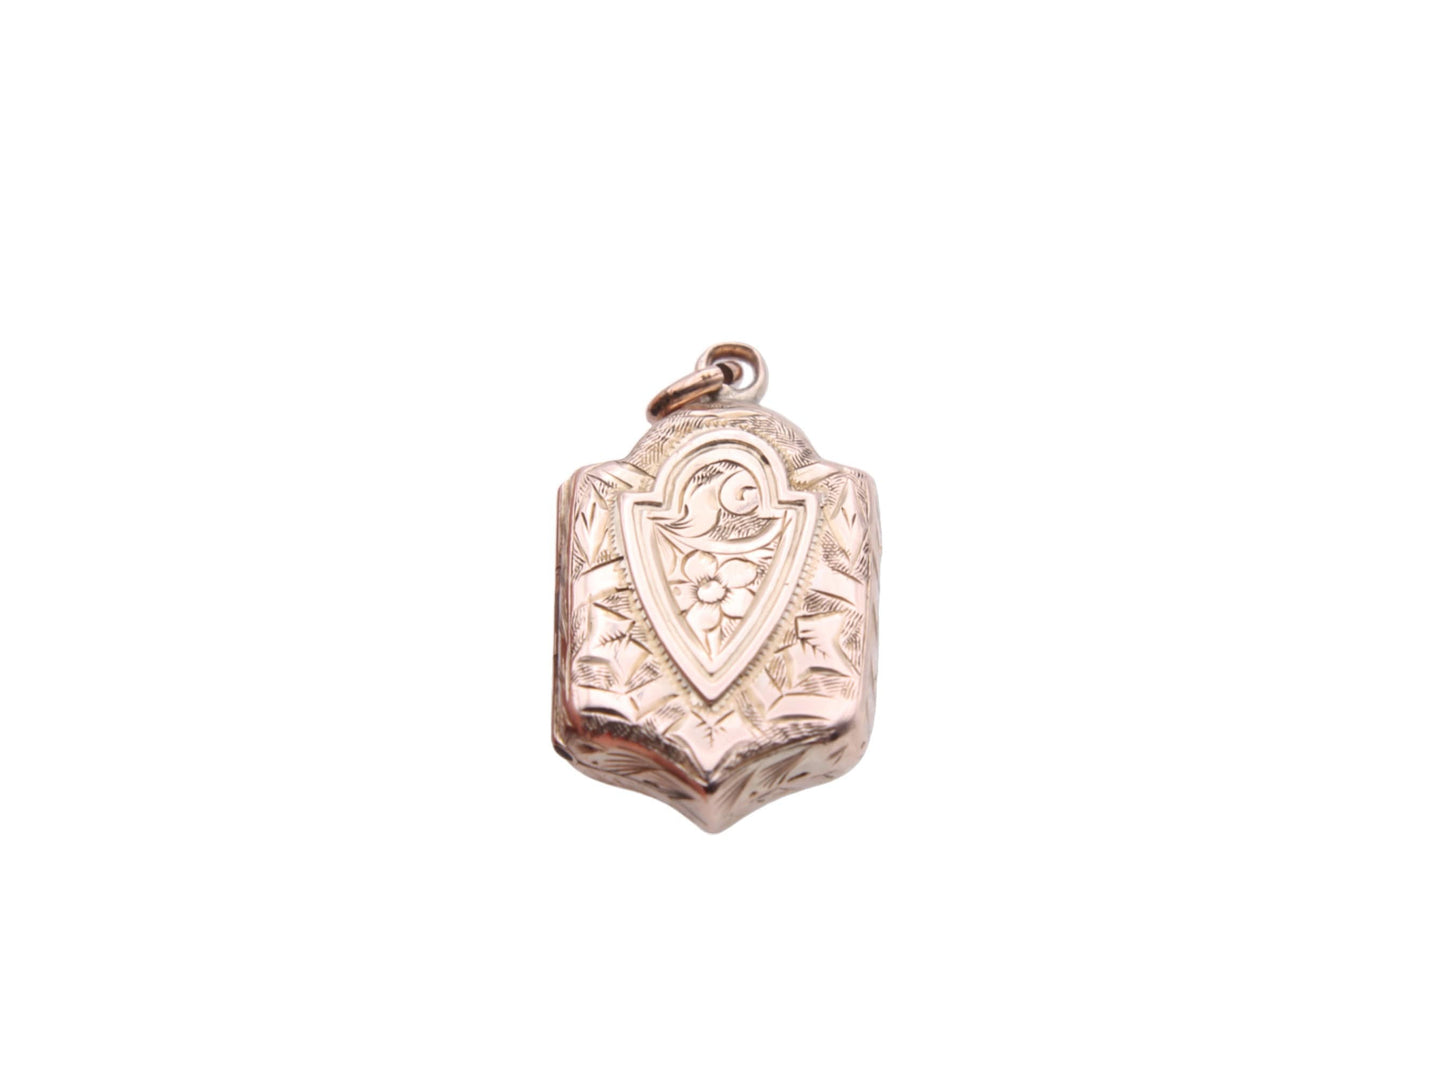 Antique Victorian 9ct Gold Shield Shaped Locket